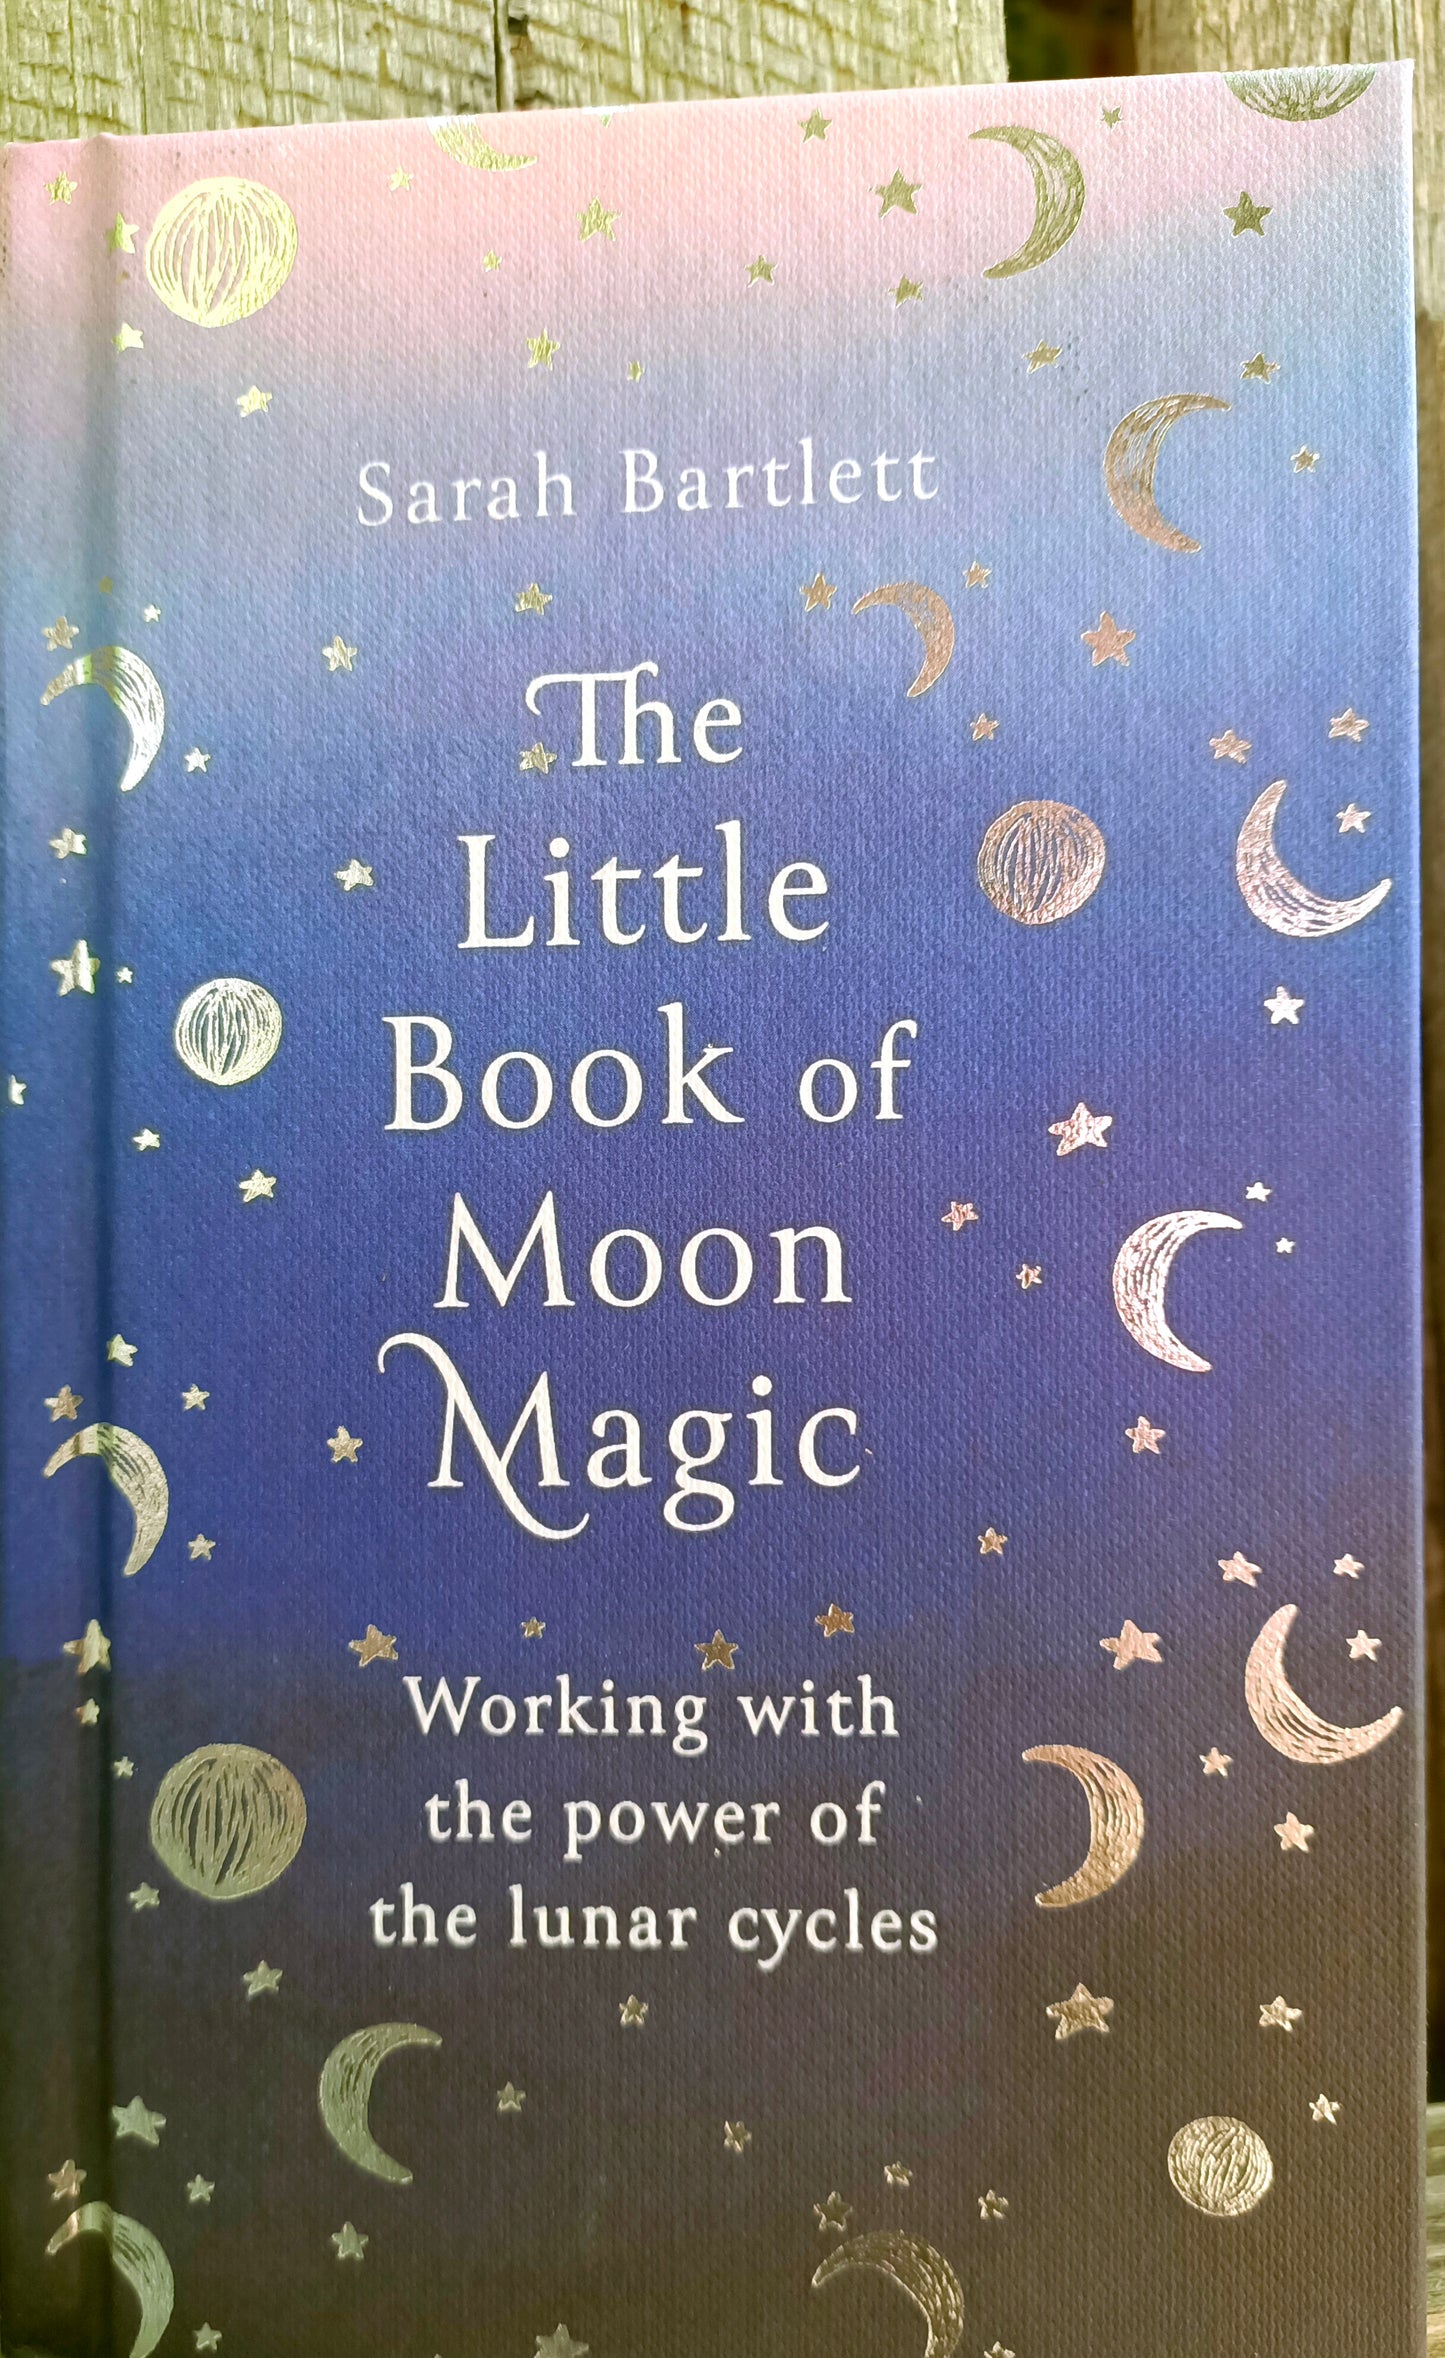 The Little Book of Moon Magic Working with the power of the lunar cycles